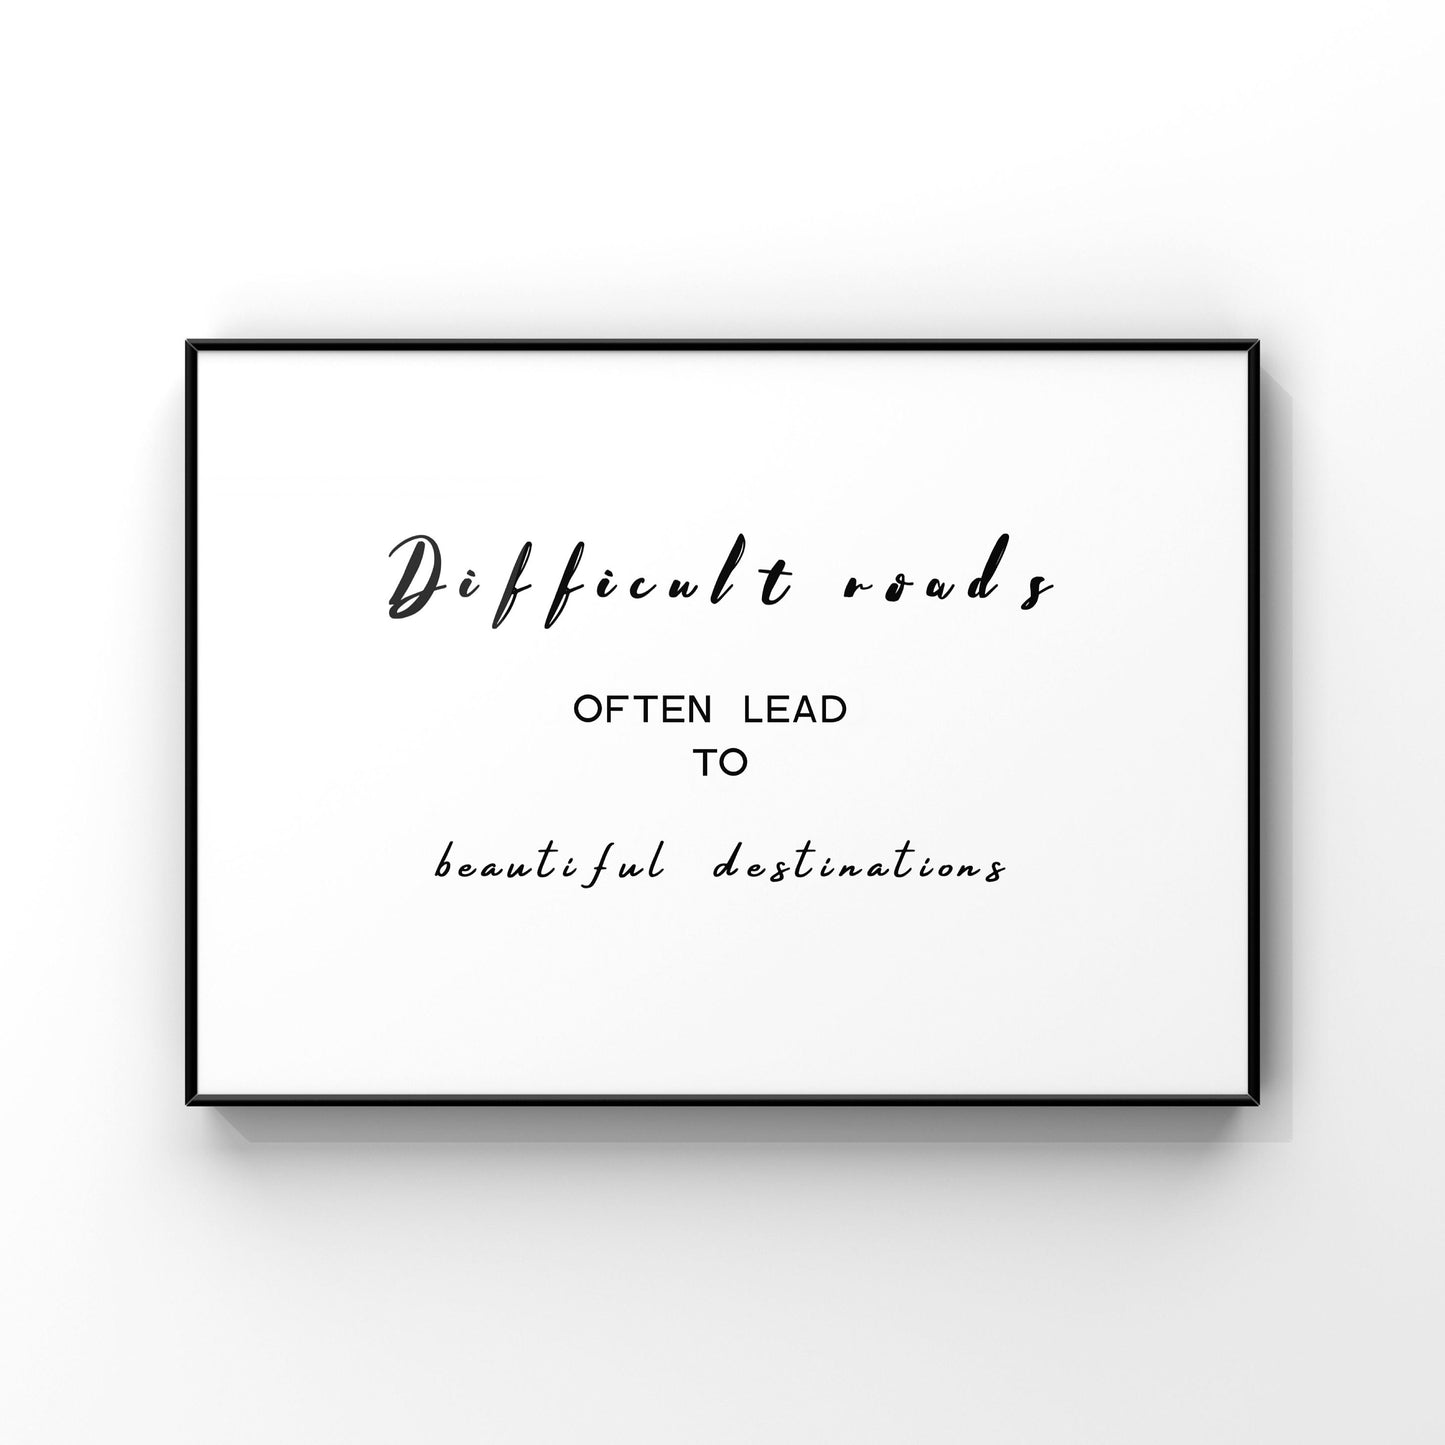 Difficult roads often lead to beautiful destinations, Typography Print, Motivational Print, Inspirational Quote,Home Wall Decor,Office Decor